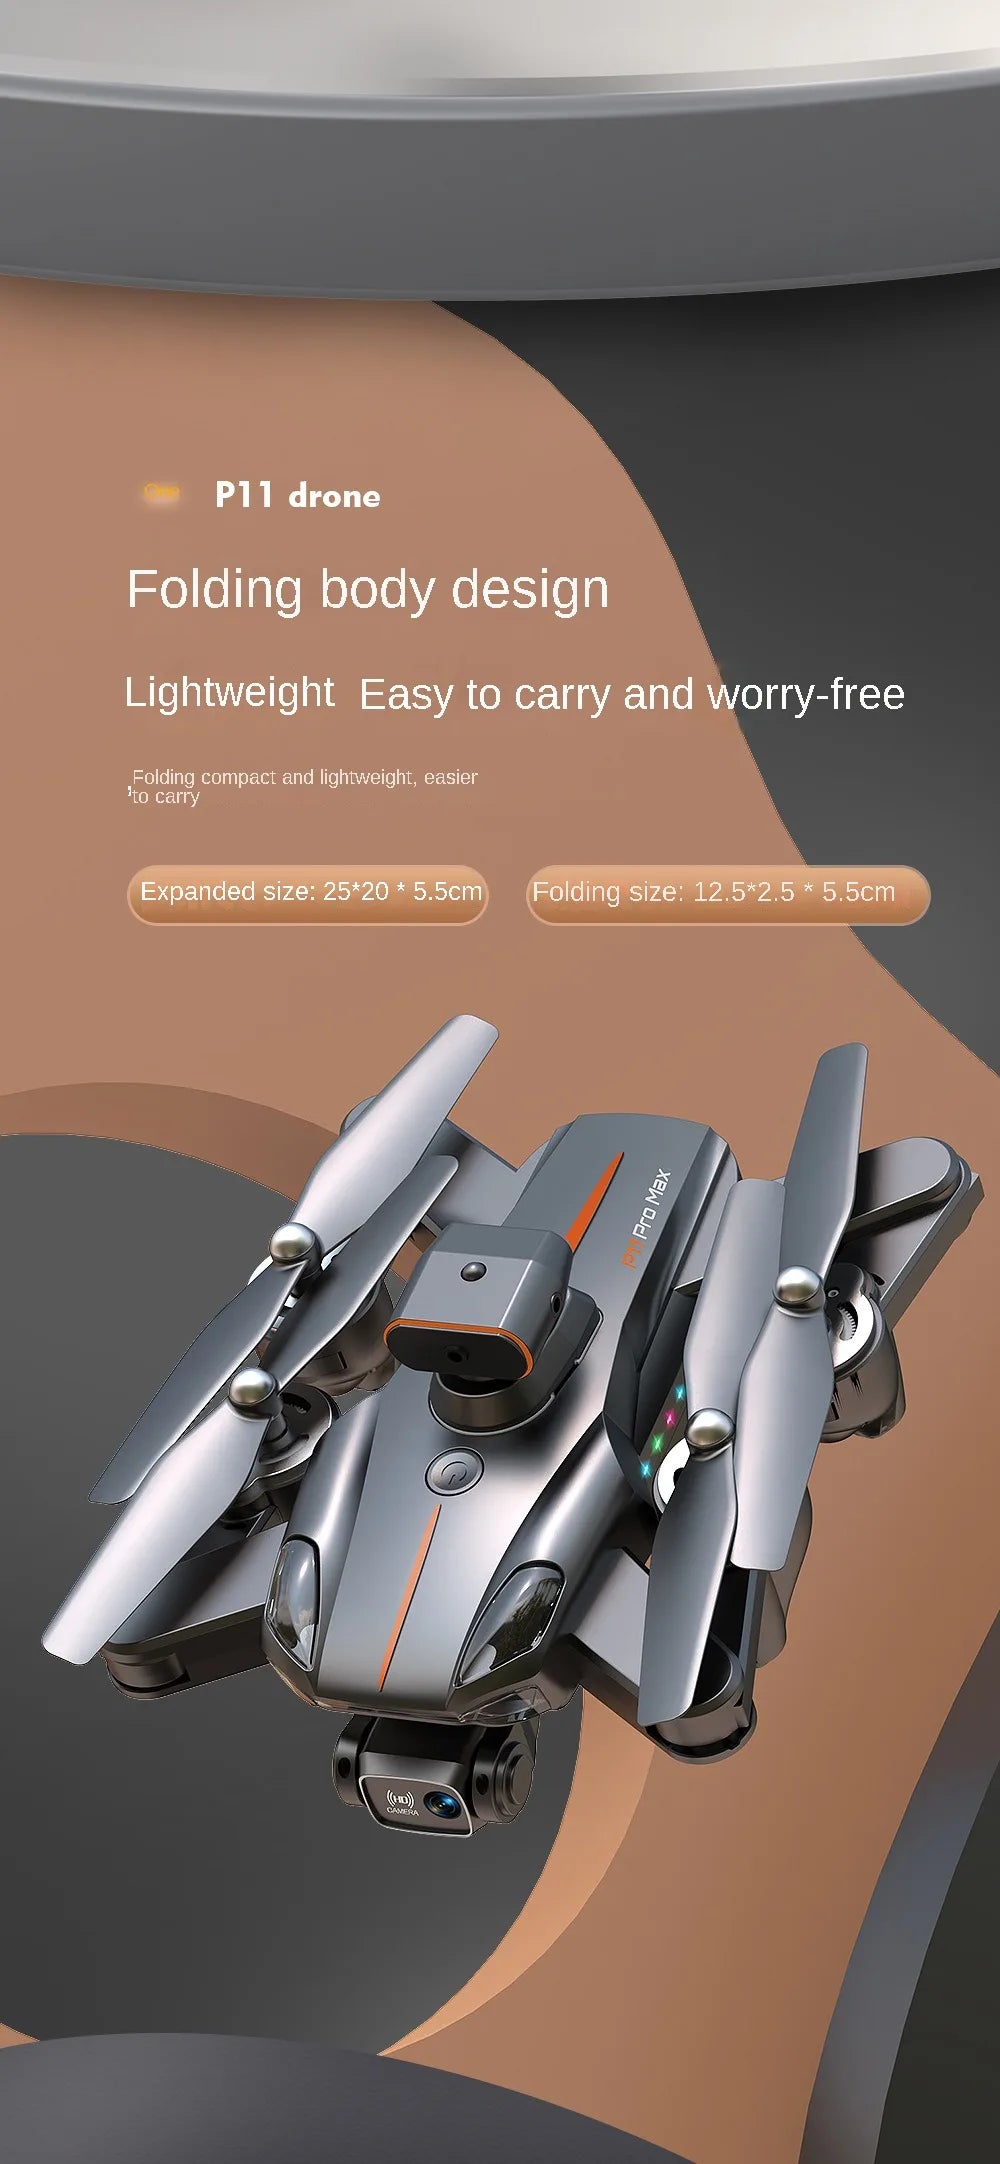 P11 Drone, p11 drone folding body design lightweight easy to carry and worry-